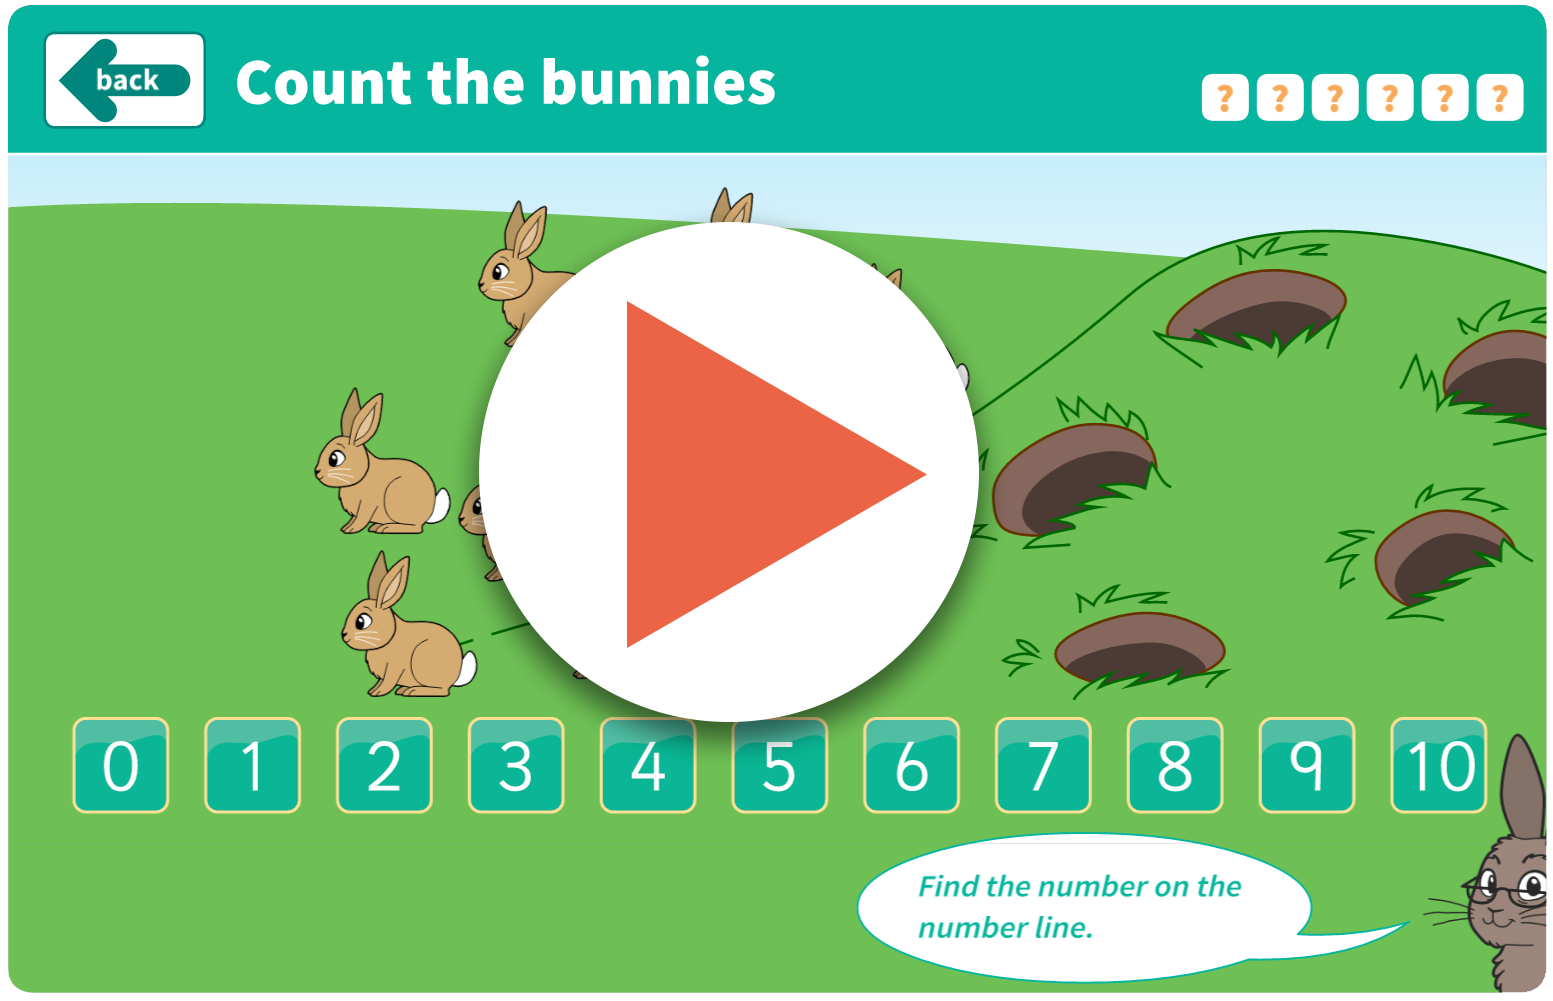 Counting bunnies game (interactive)